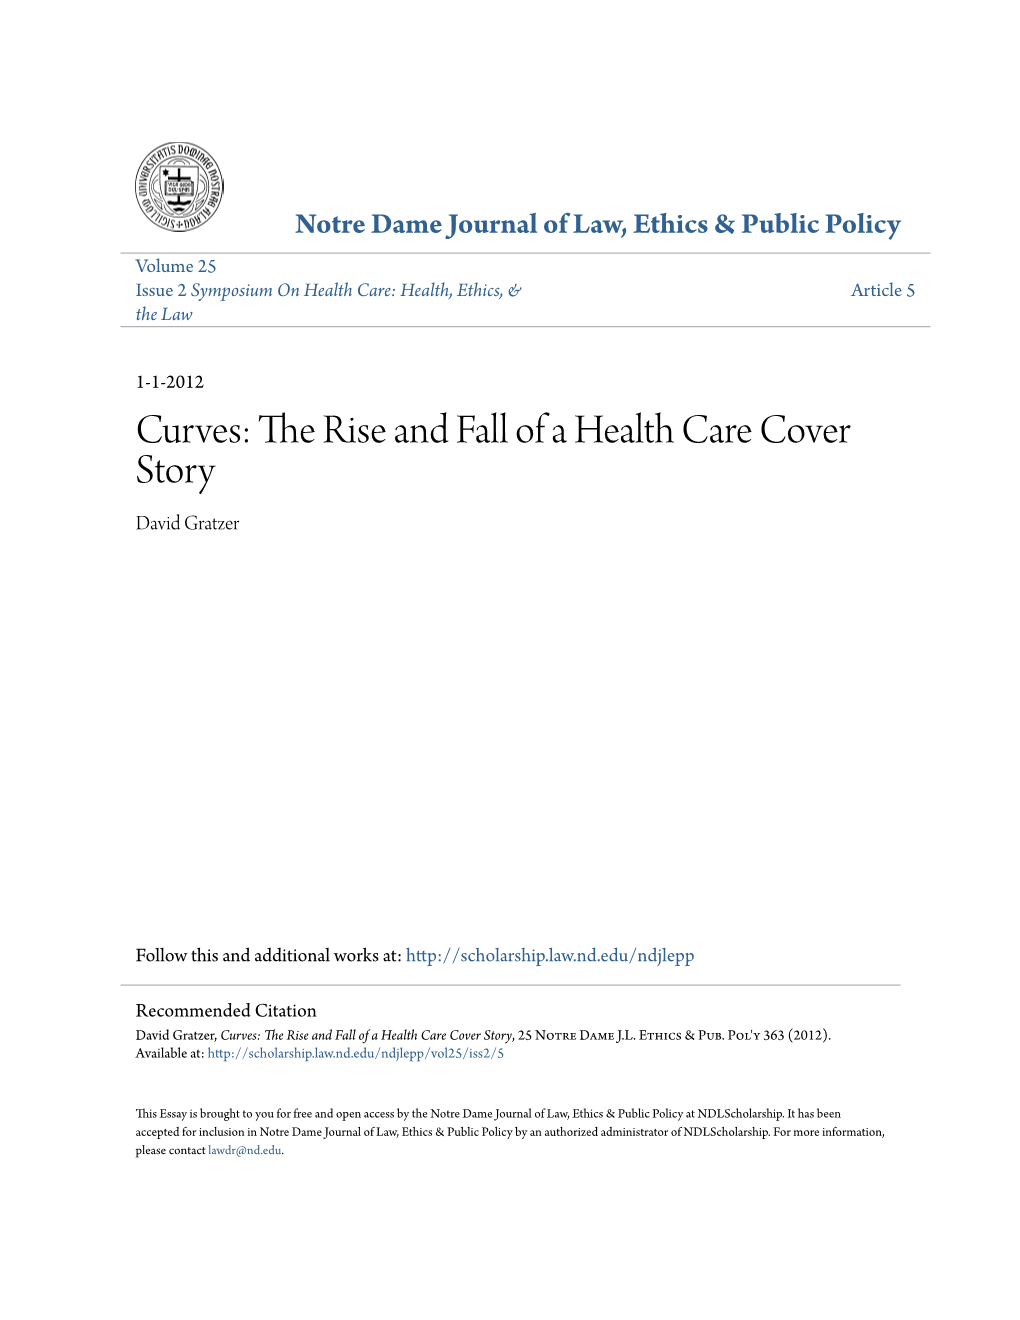 The Rise and Fall of a Health Care Cover Story David Gratzer